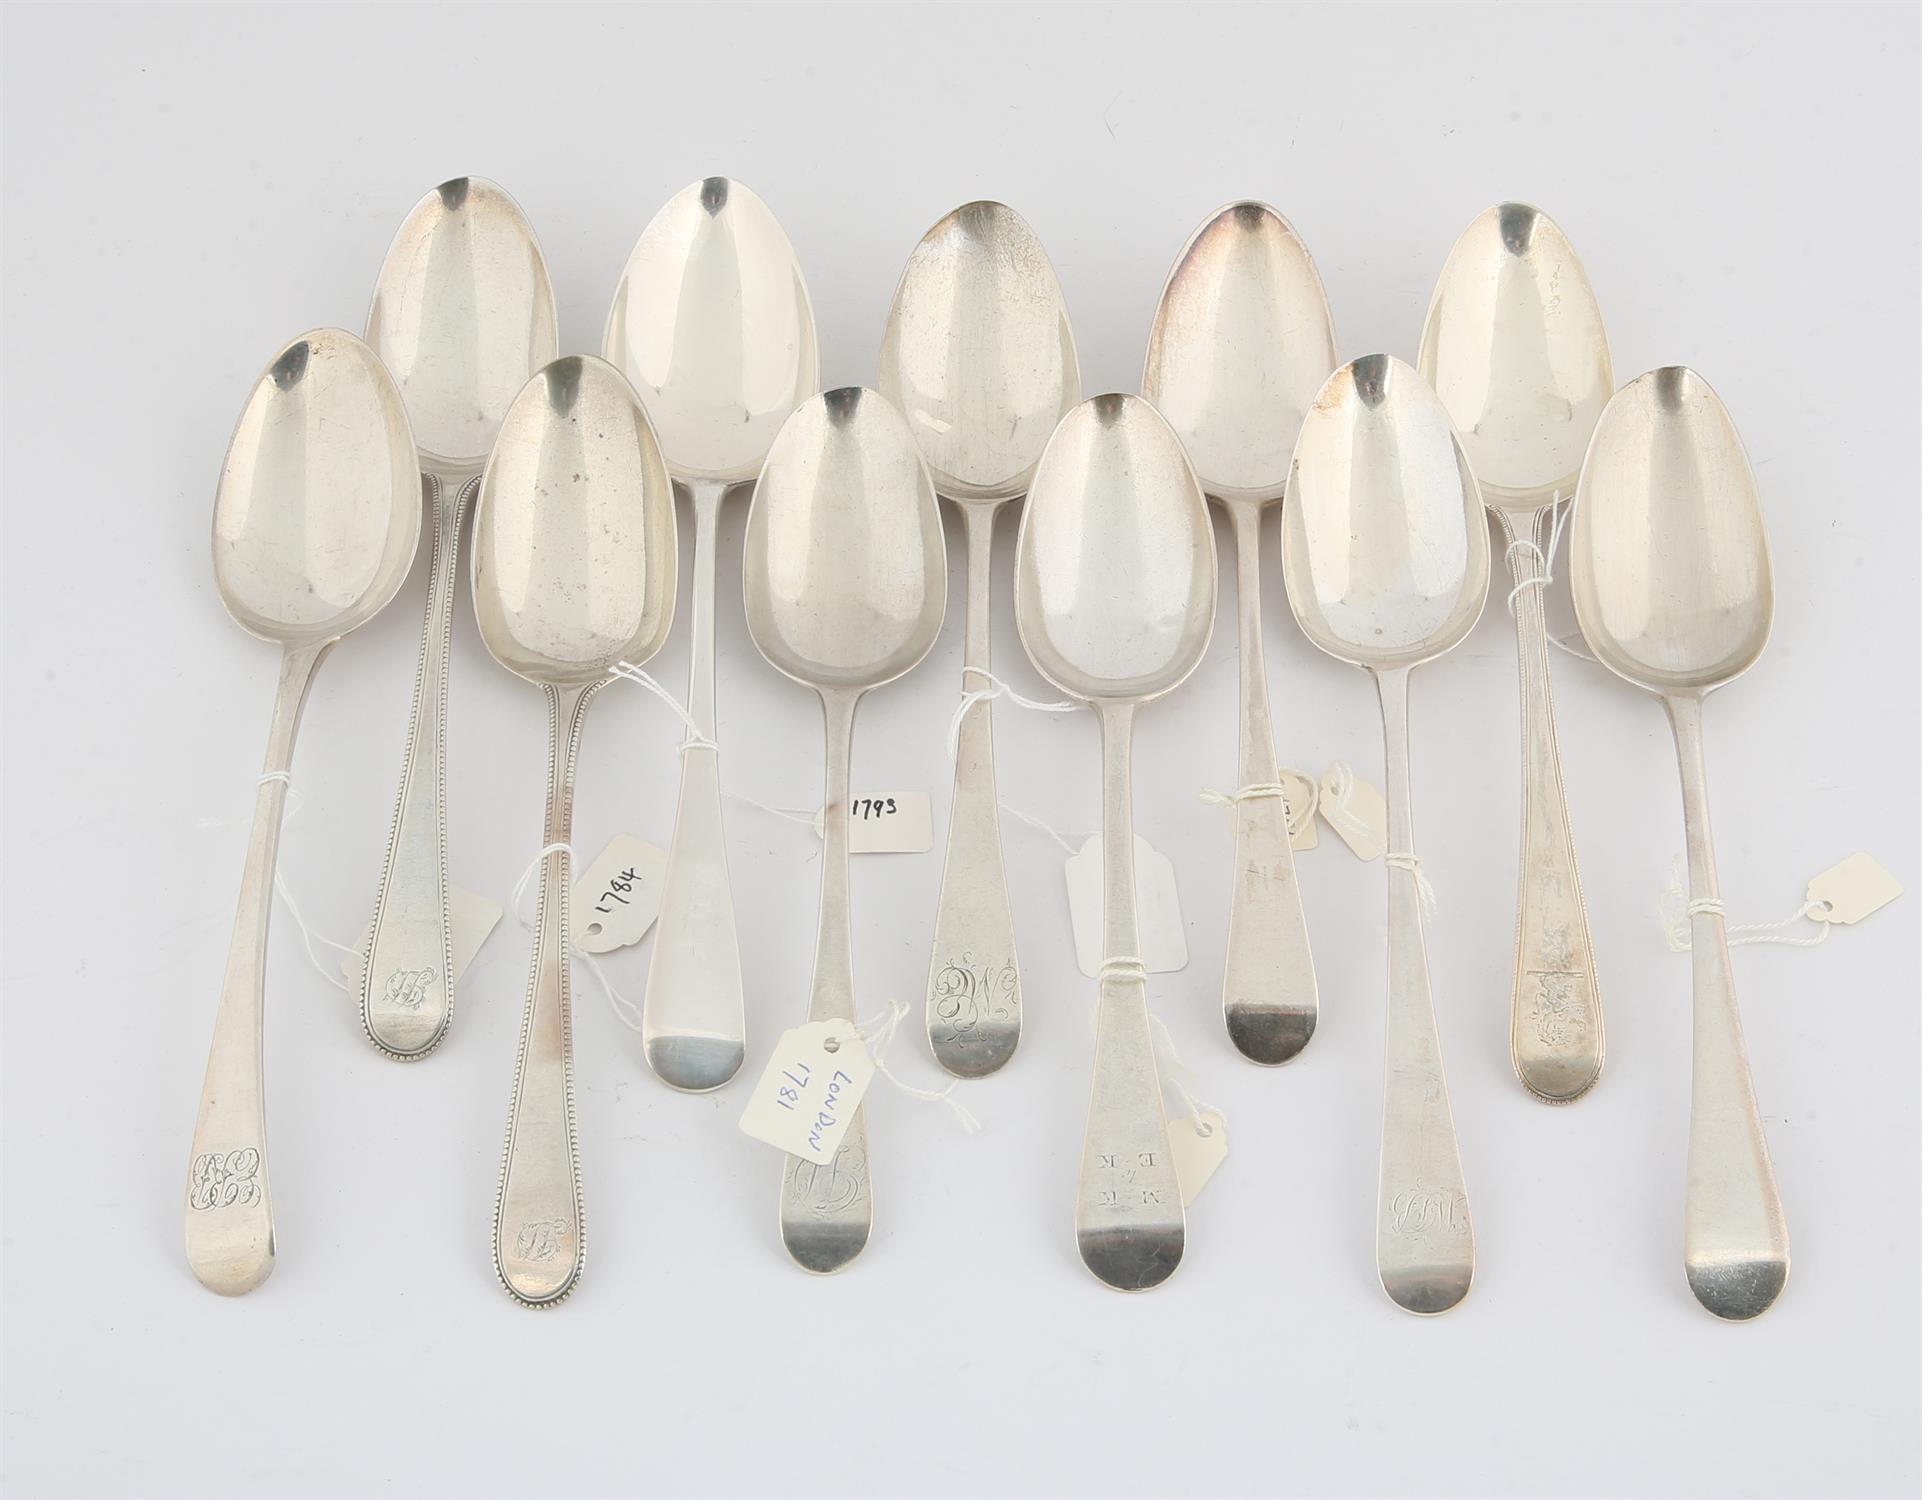 Eleven various 18th century English Old English pattern table spoons, 20.5 ozs 636 grams SILVER